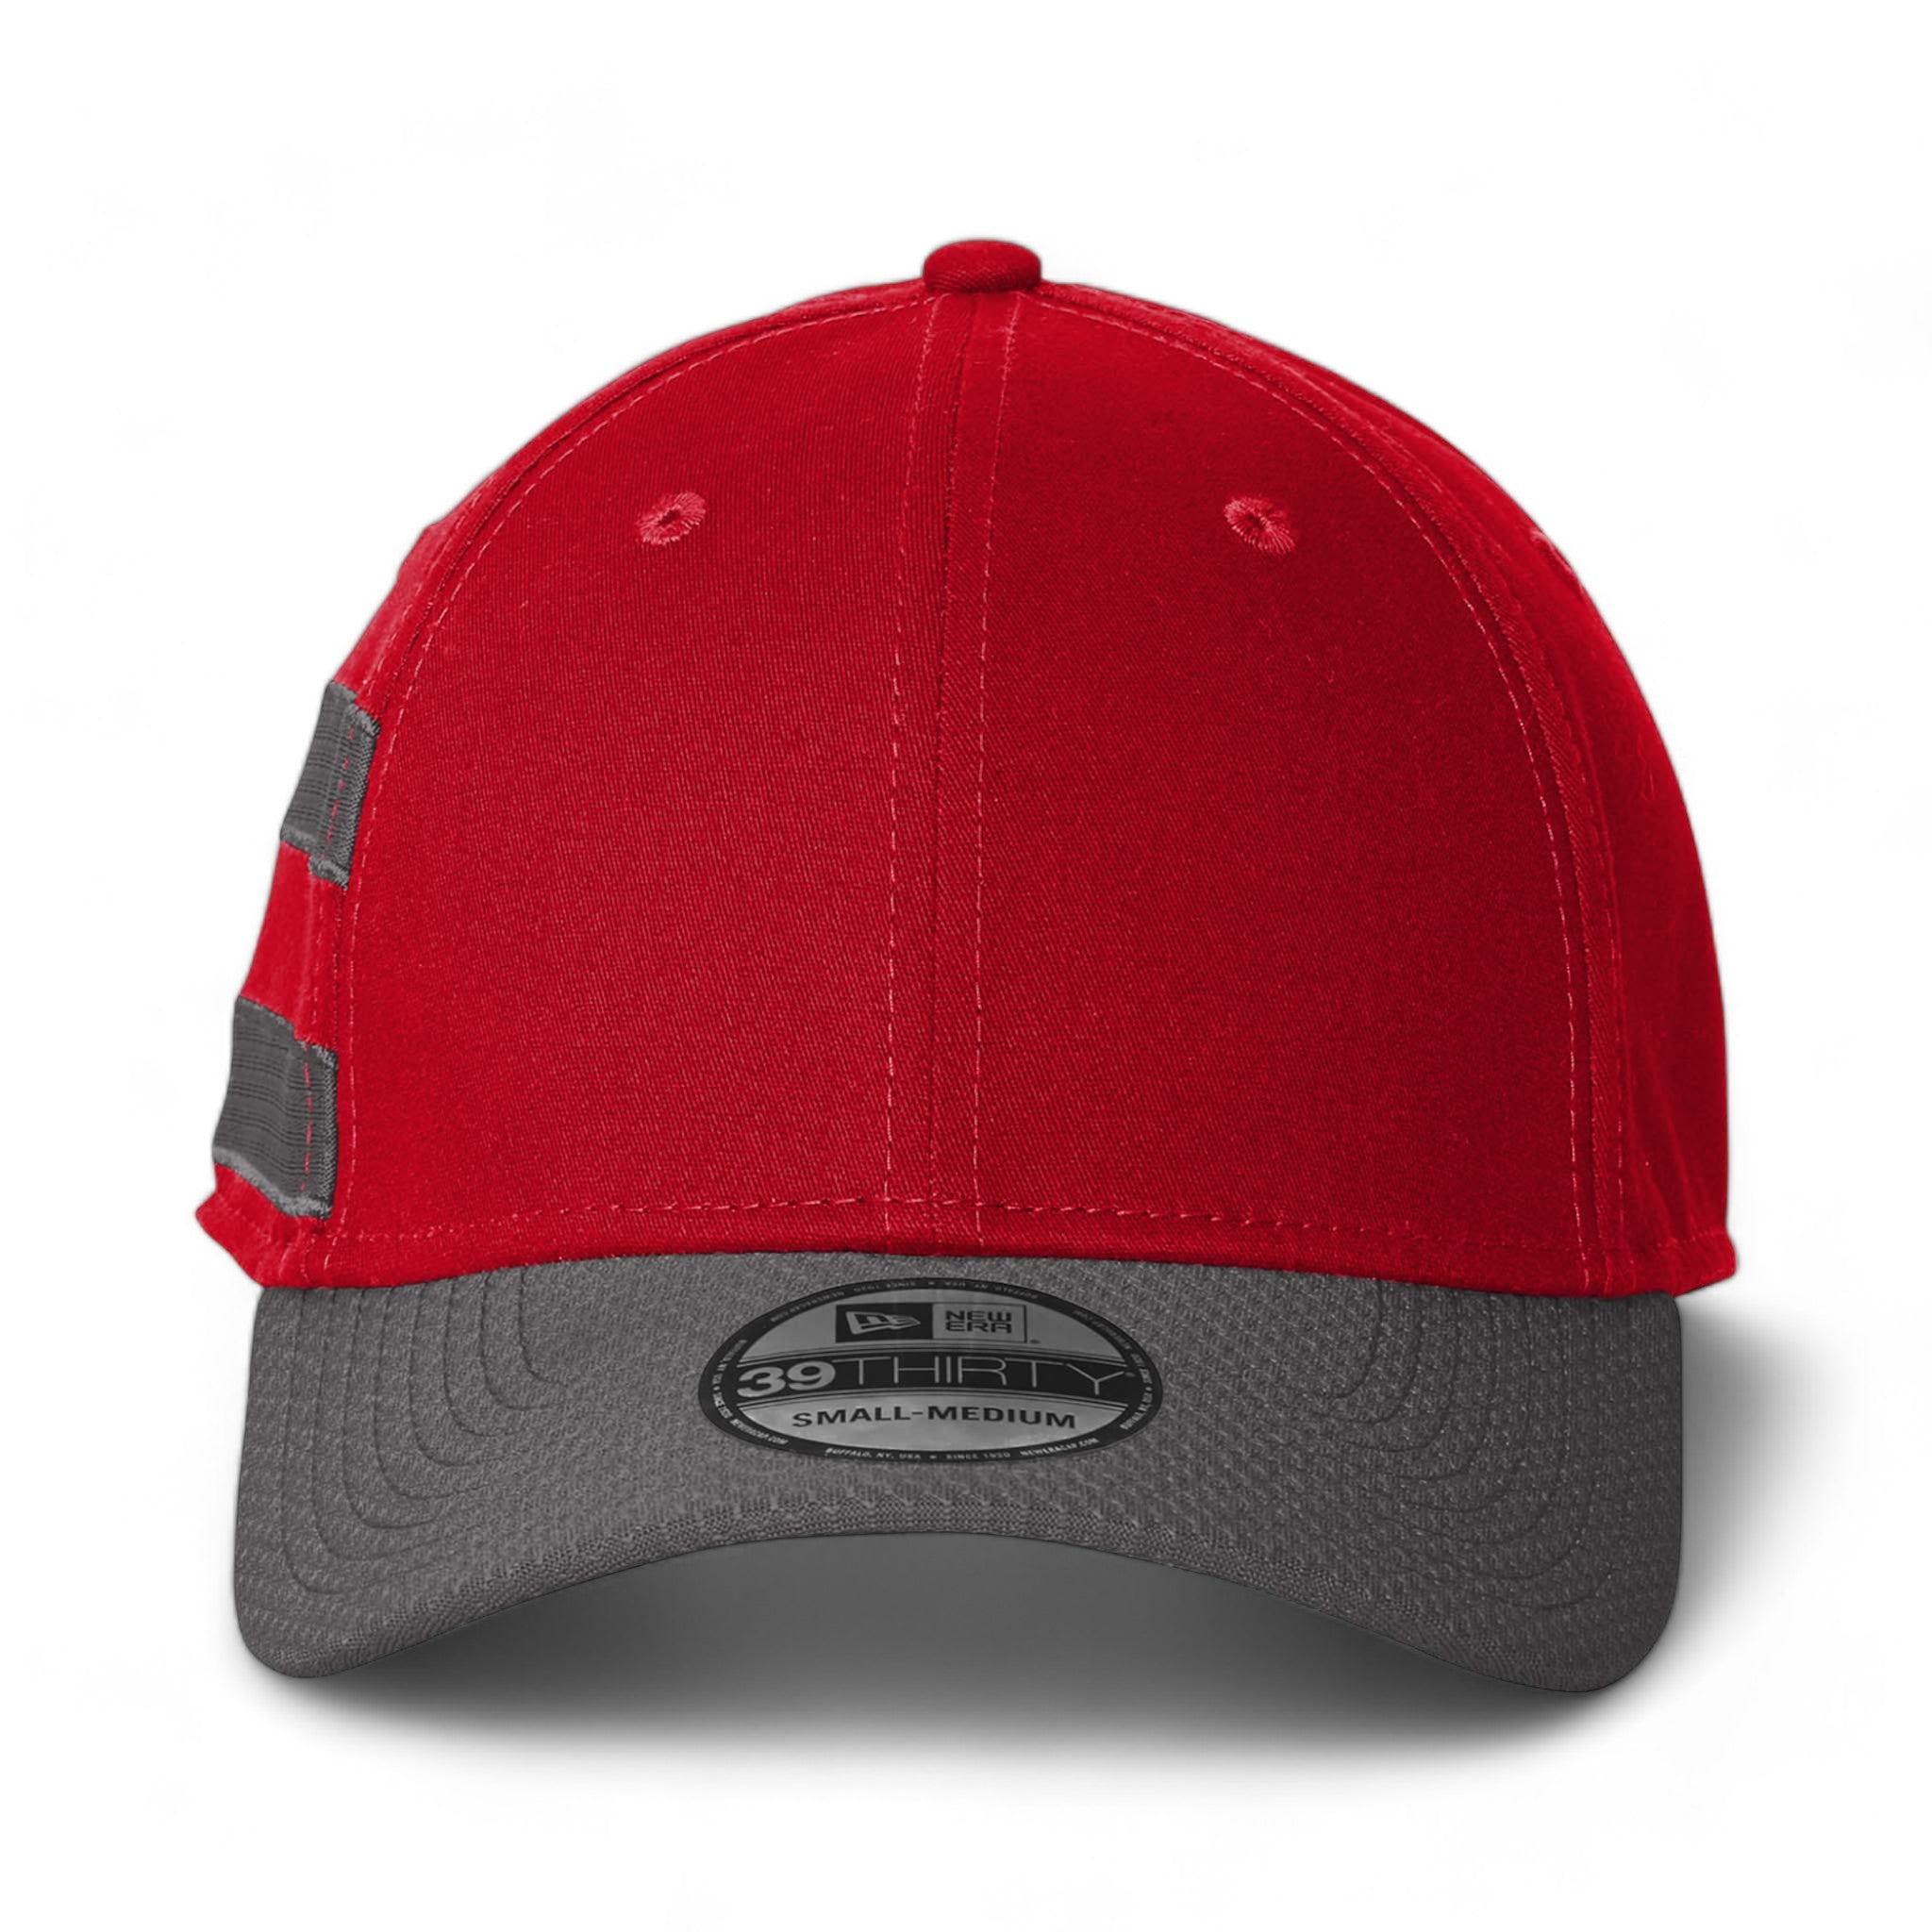 Front view of New Era NE1122 custom hat in scarlet and graphite